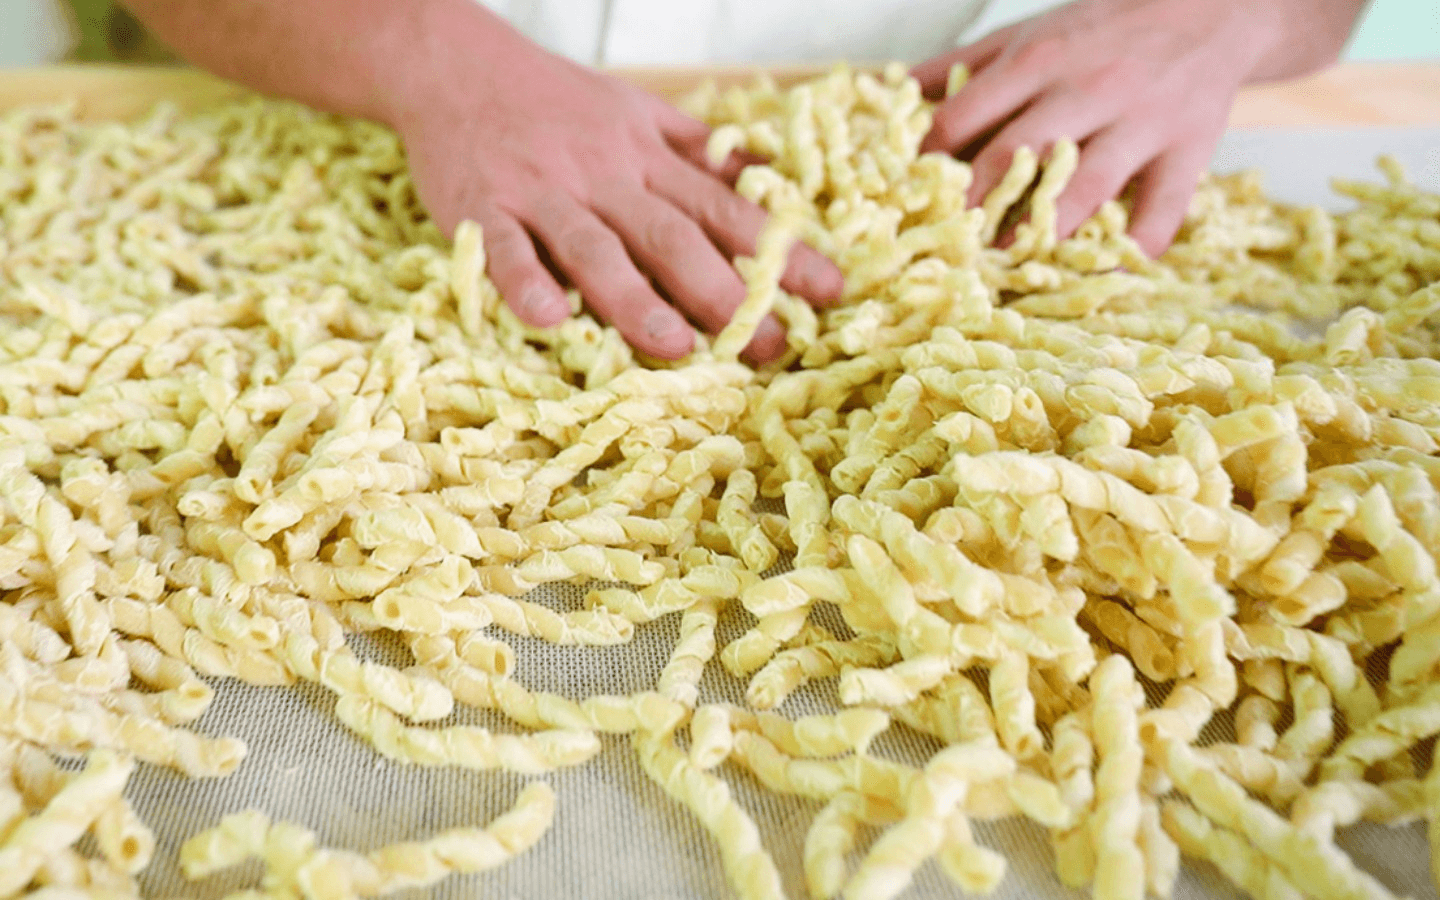 Introducing our Amazing New Pasta!